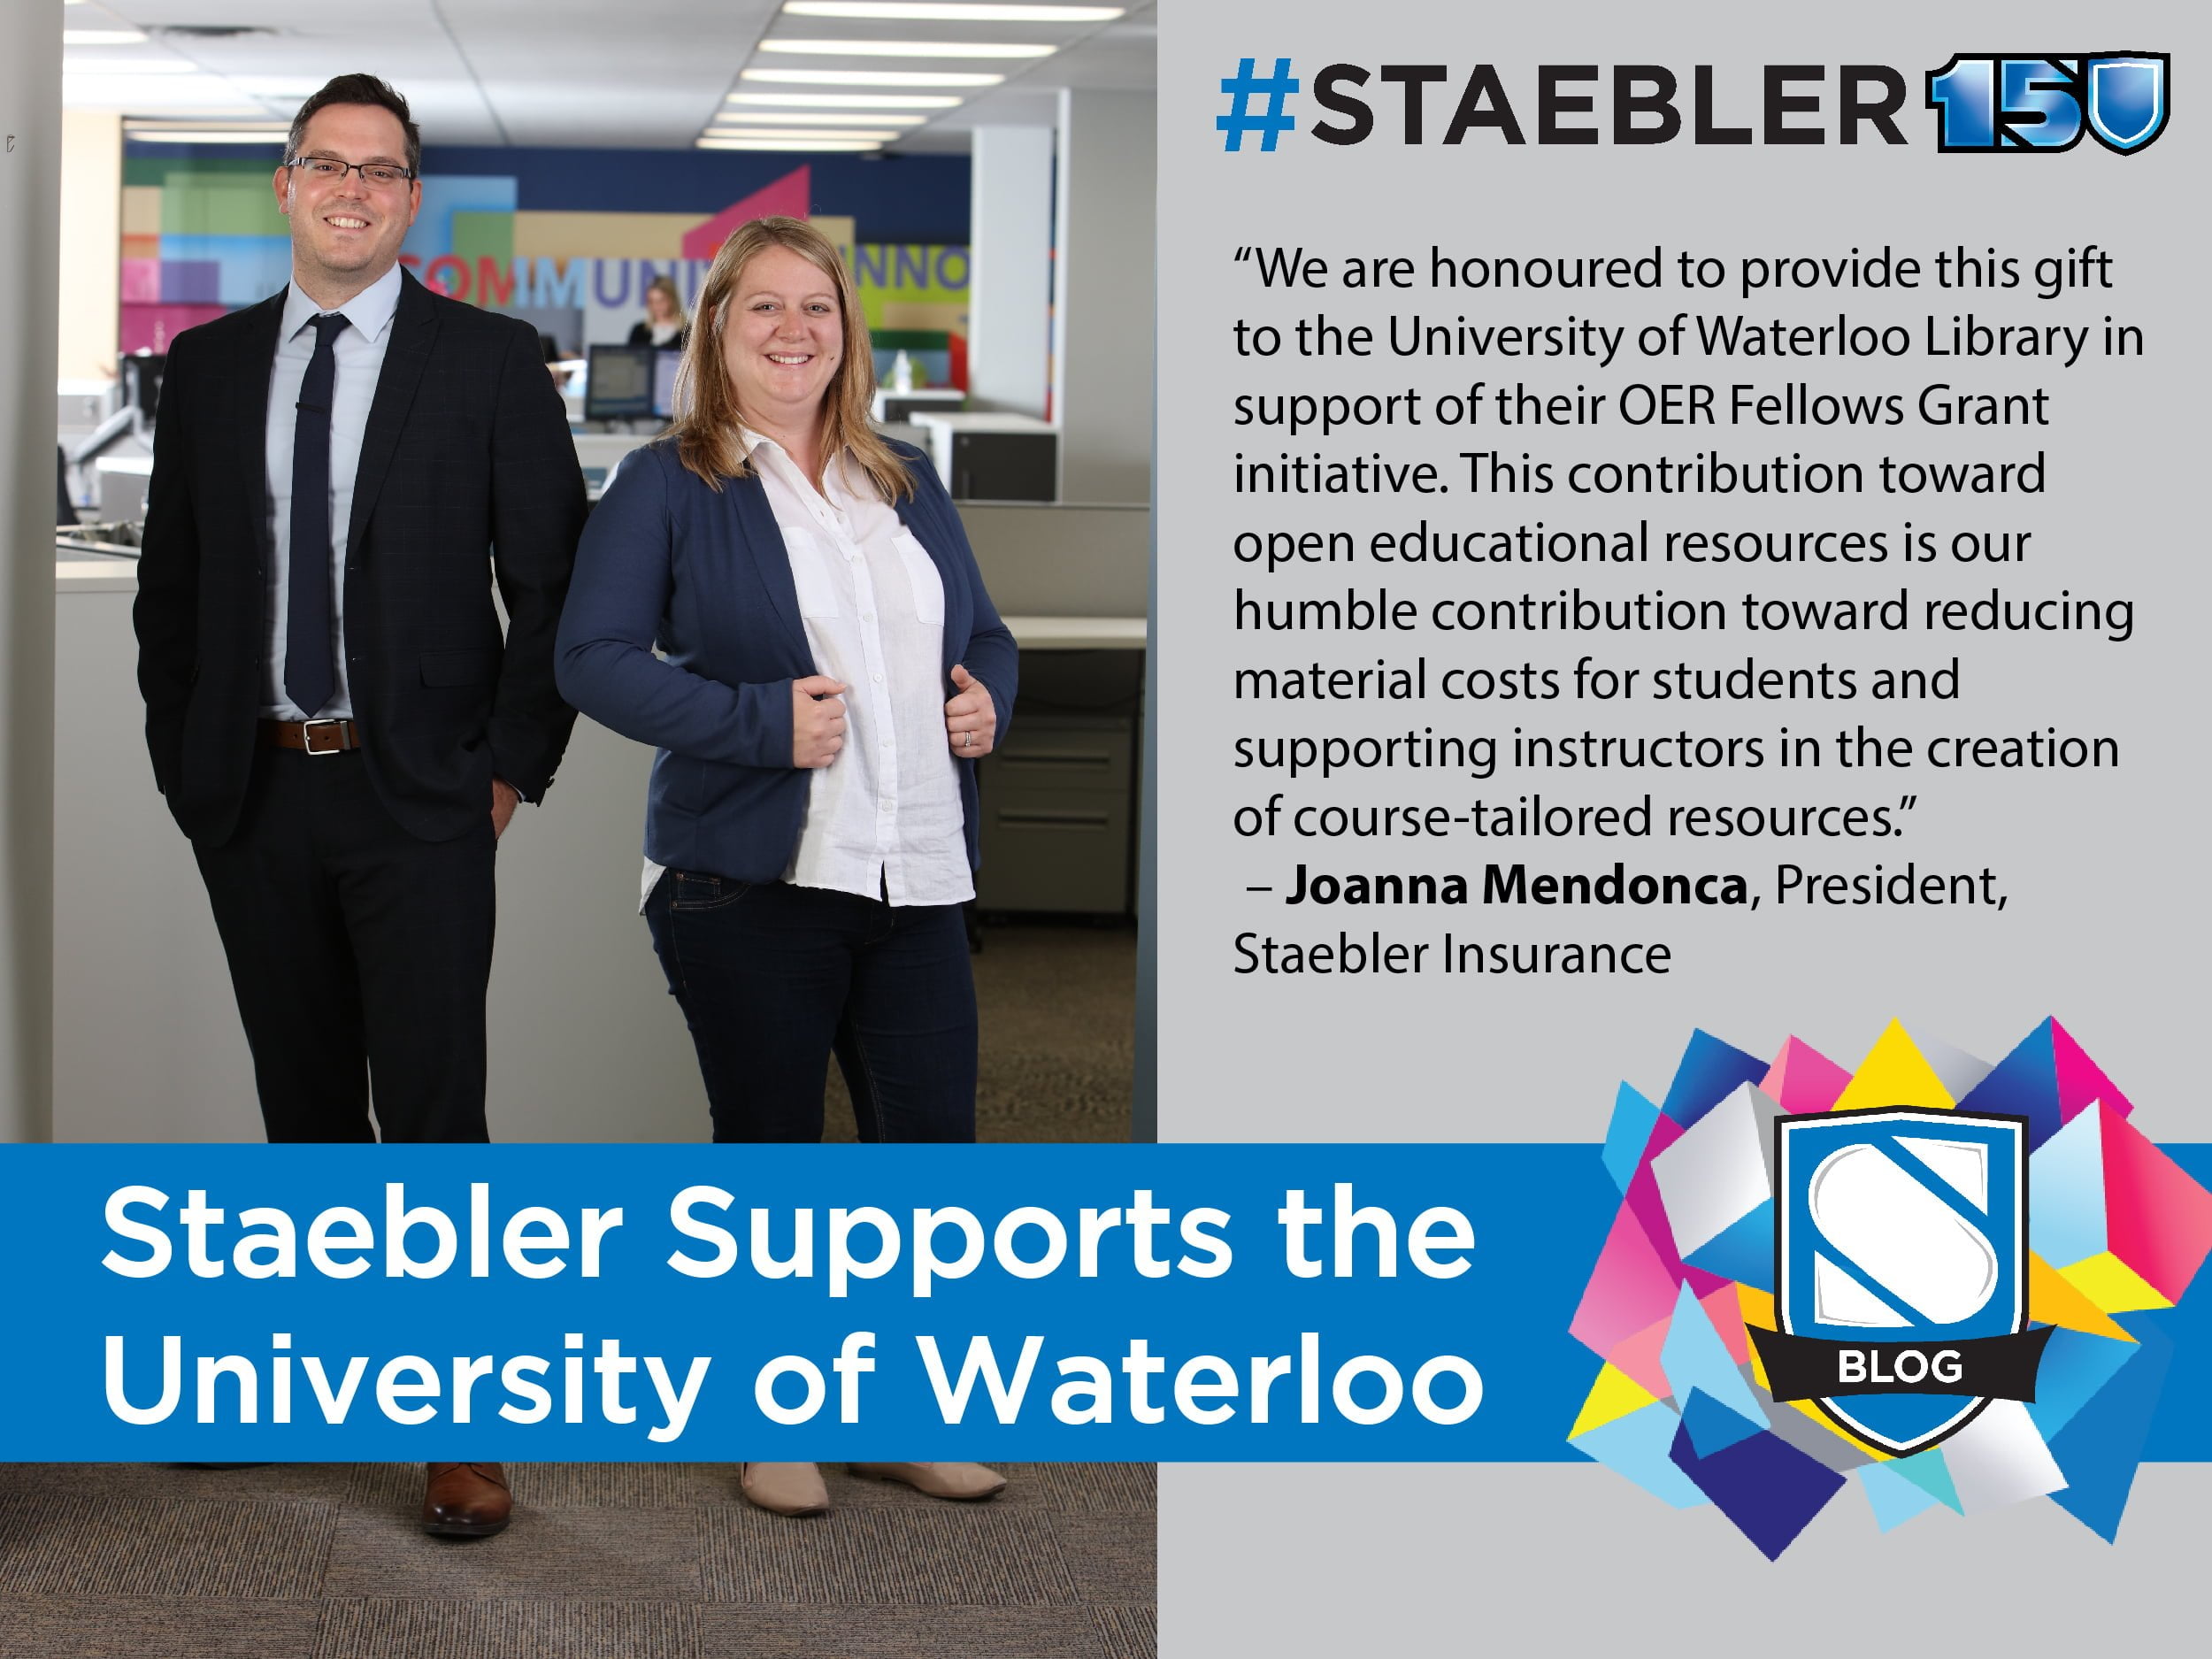 Staebler Insurance Supports the University of Waterloo